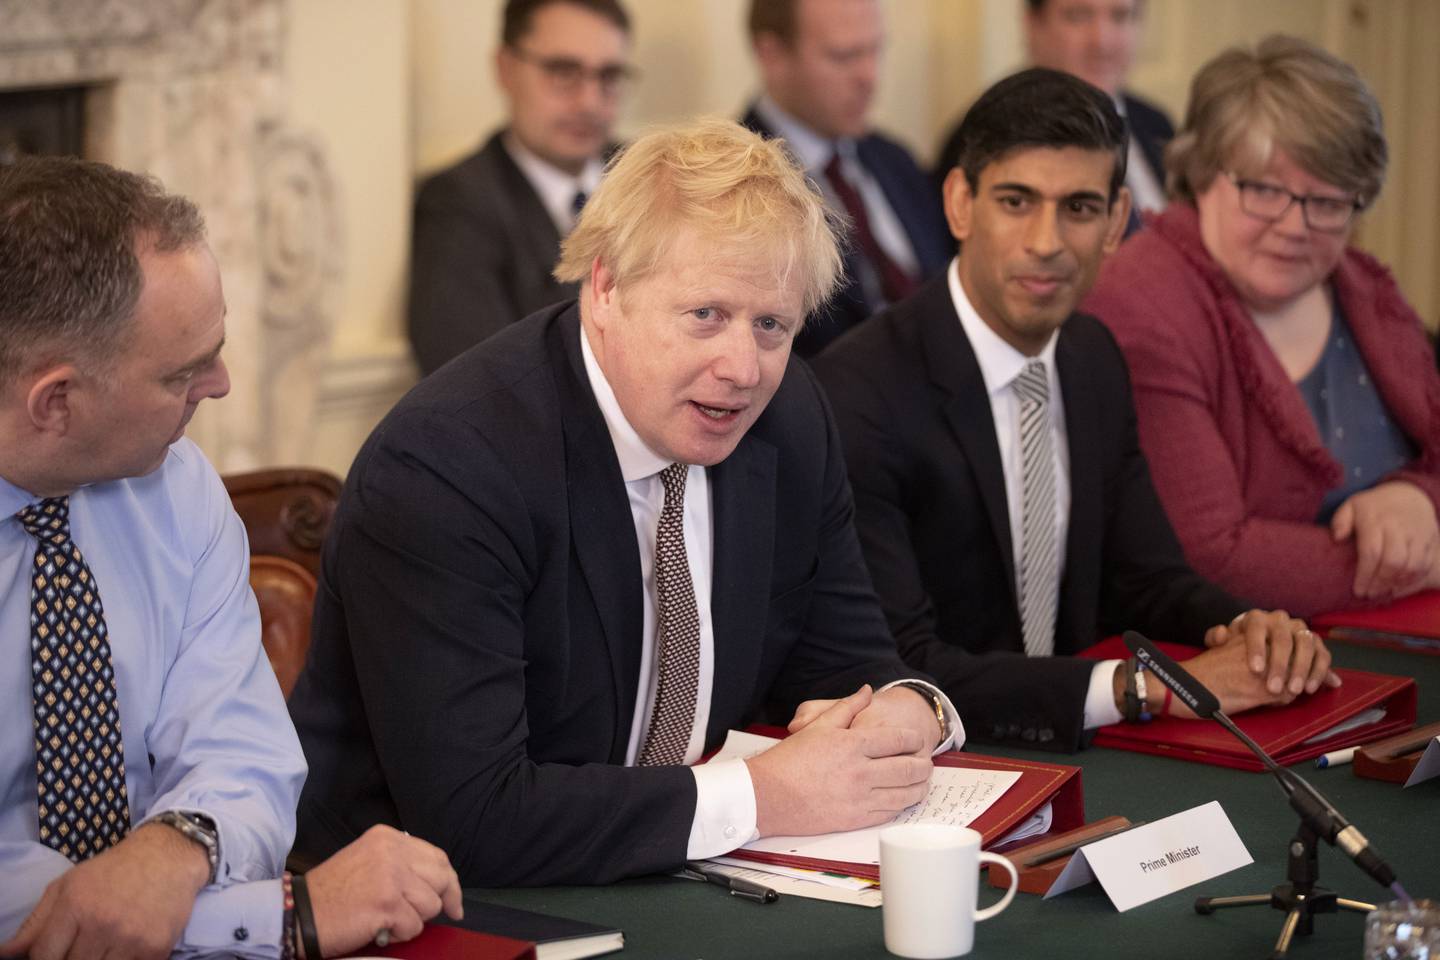 Boris Johnson speaks during his first Cabinet meeting flanked by his then new Chancellor of the Exchequer Rishi Sunak, in London, on February 14, 2020. AP